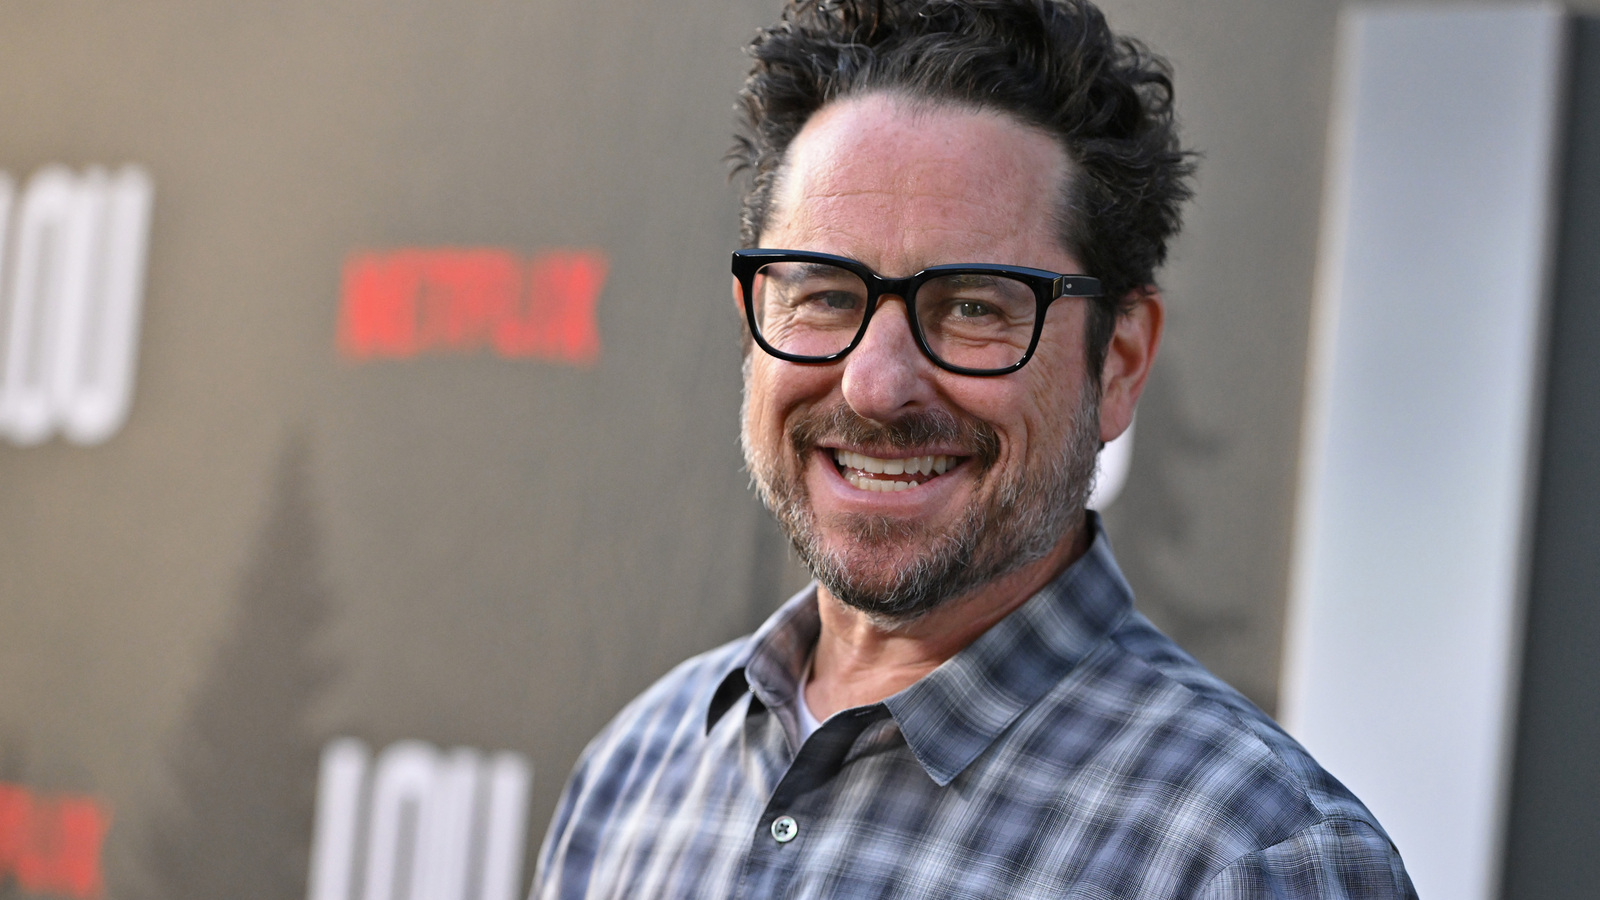 J.J. Abrams attends special screening of 'Lou'